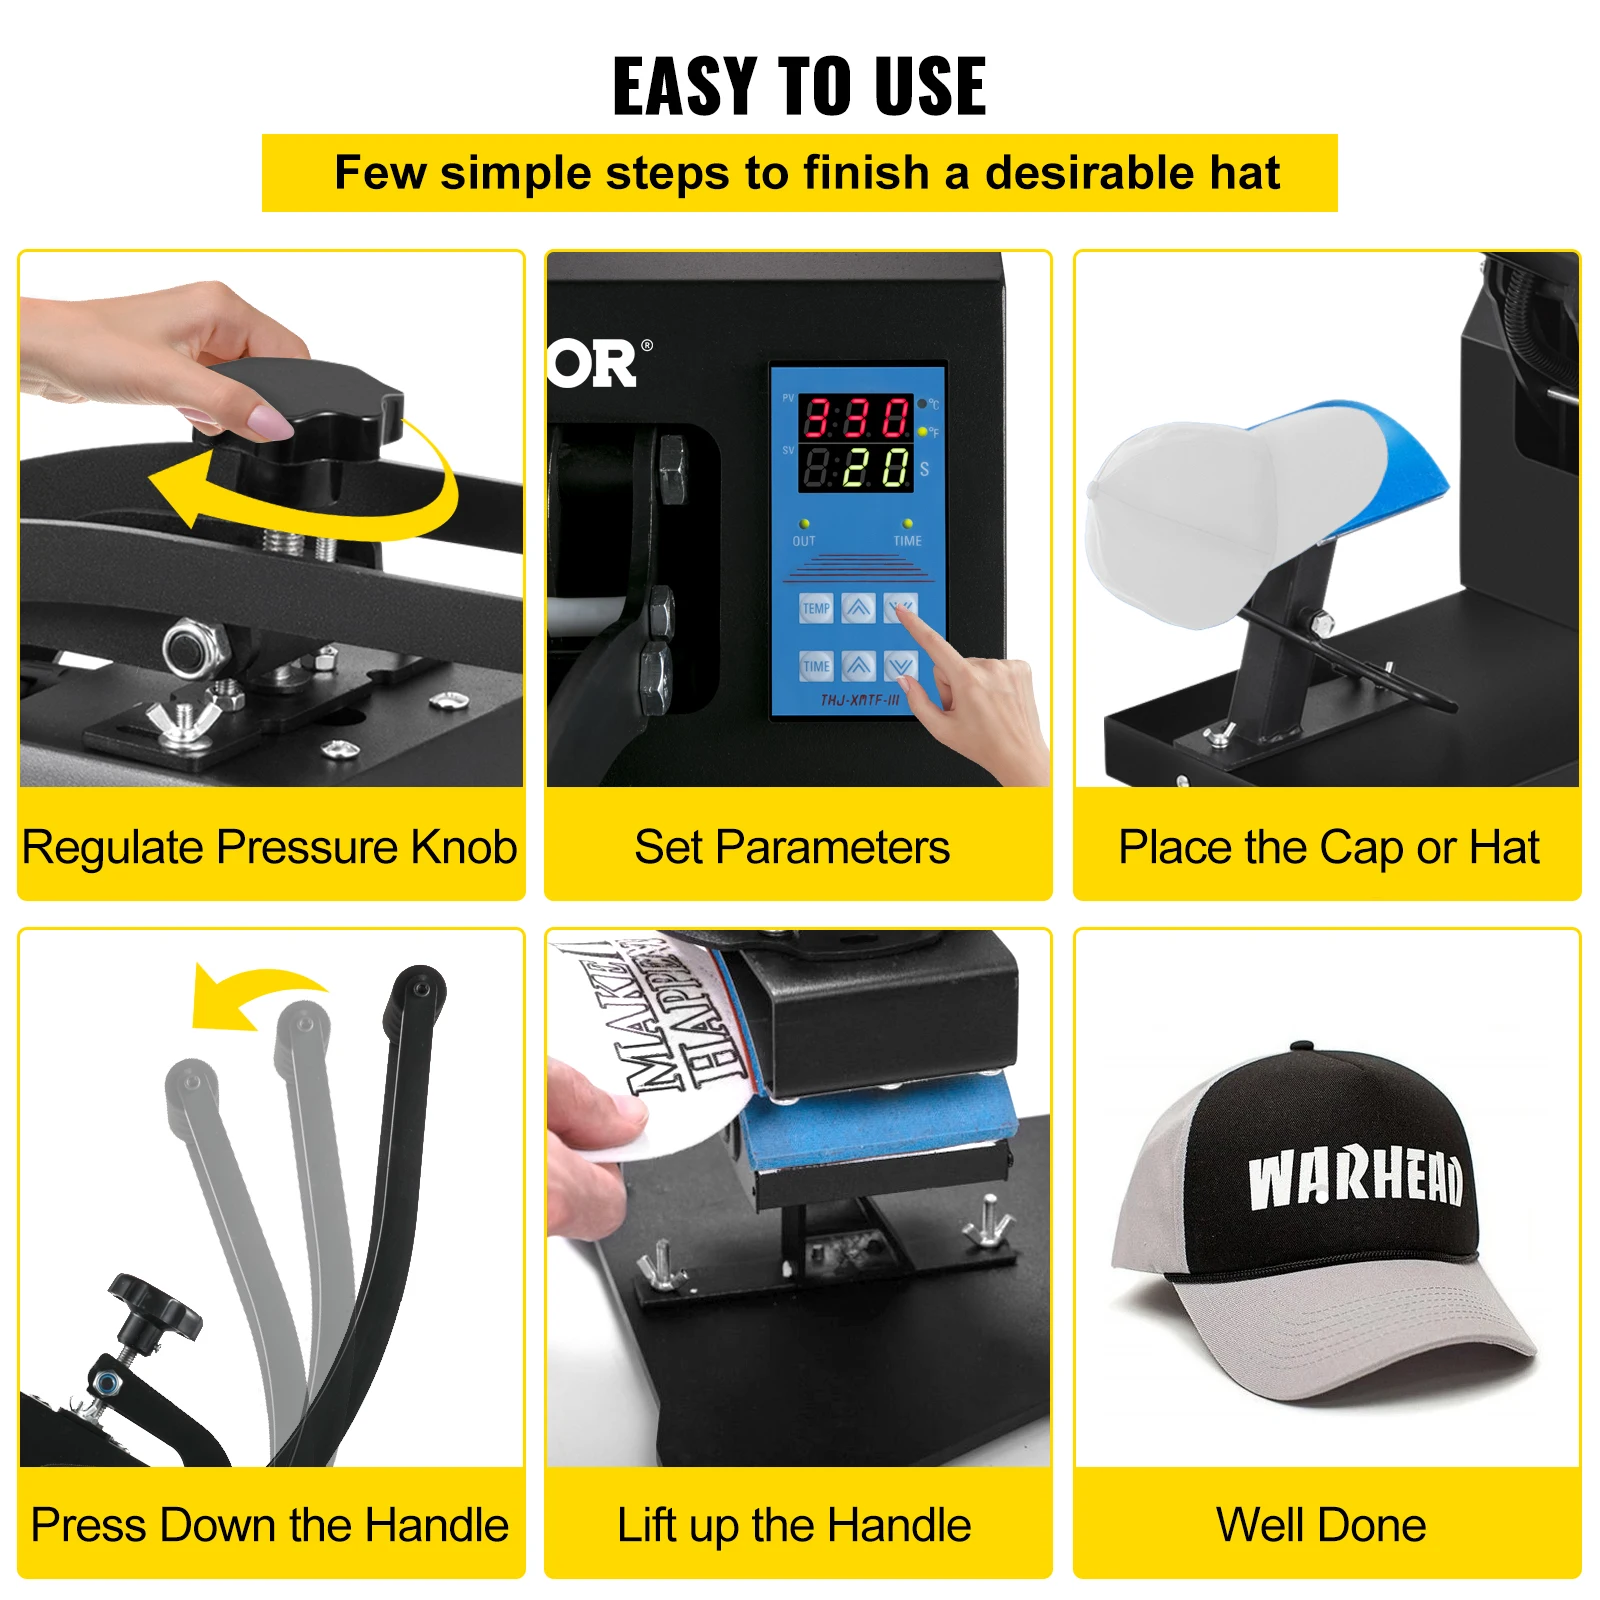 VEVOR Hat Cap Heat Press 5.5 x 3.5 inch Heat Transfer Stamping Sublimation  Machine Digital Display Clamshell for DIY Advertising - AliExpress